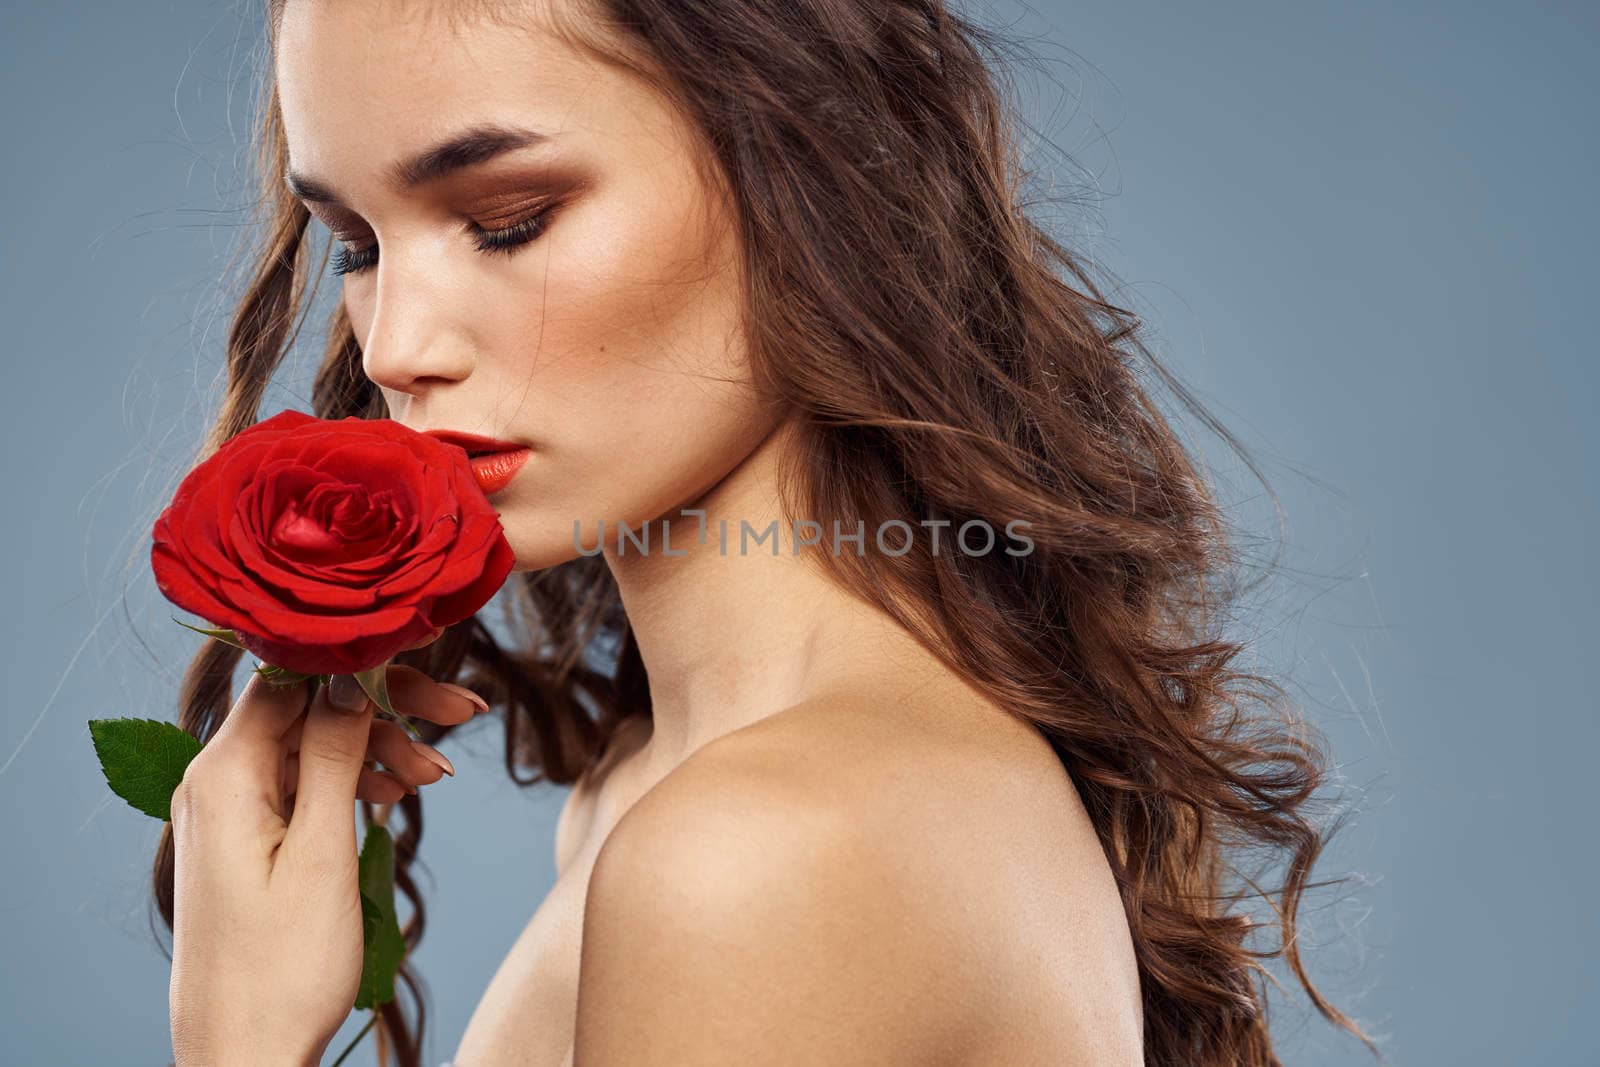 Woman portrait with red rose near the face on gray background and makeup curly hair by SHOTPRIME